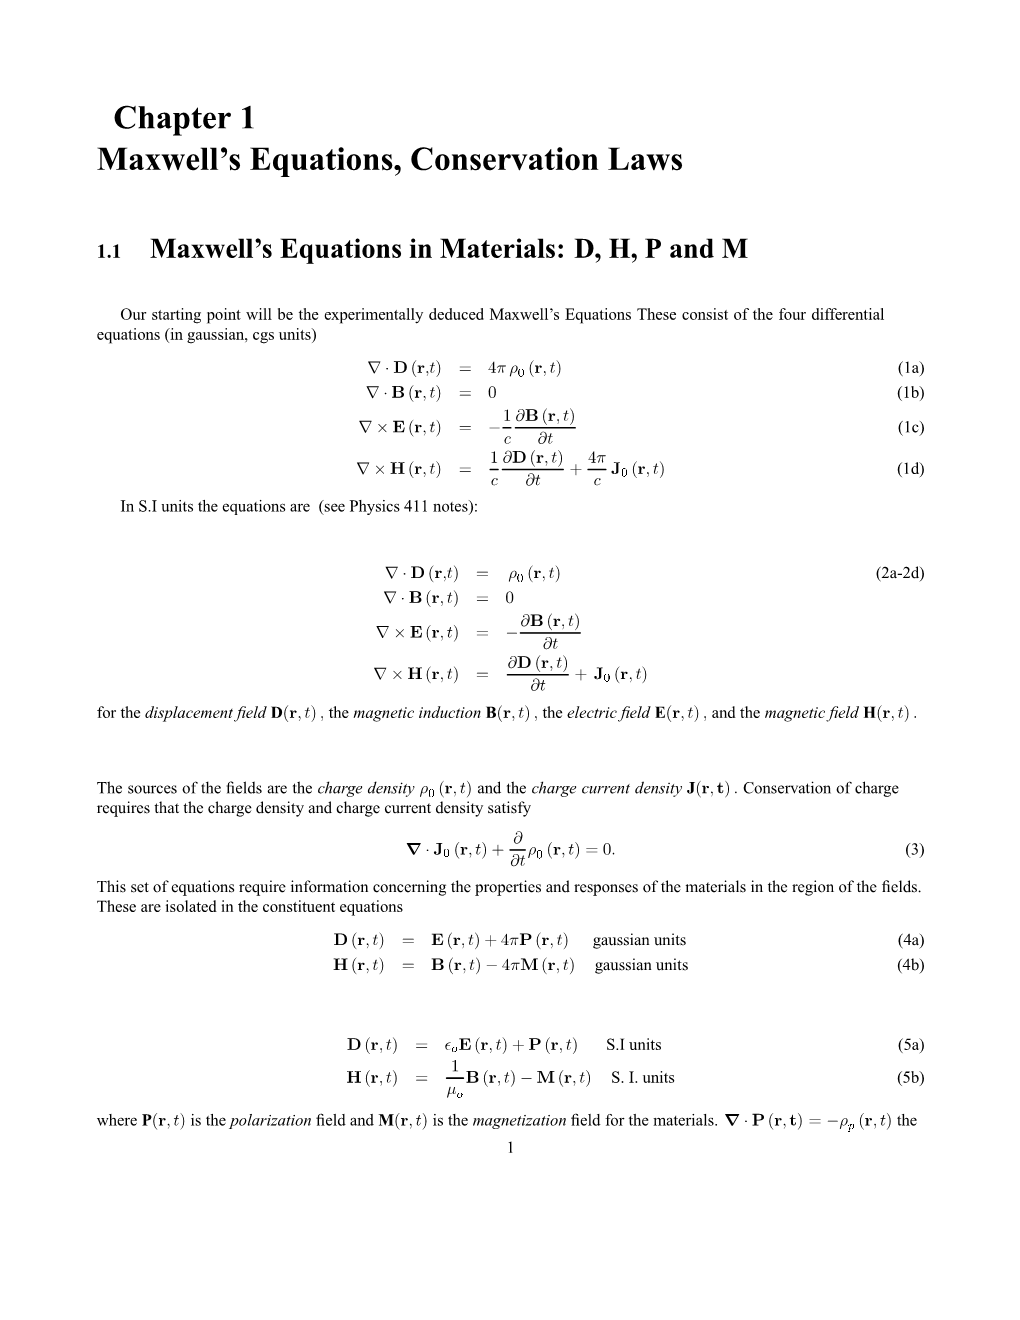 Chapter 1 Maxwell's Equations, Conservation Laws